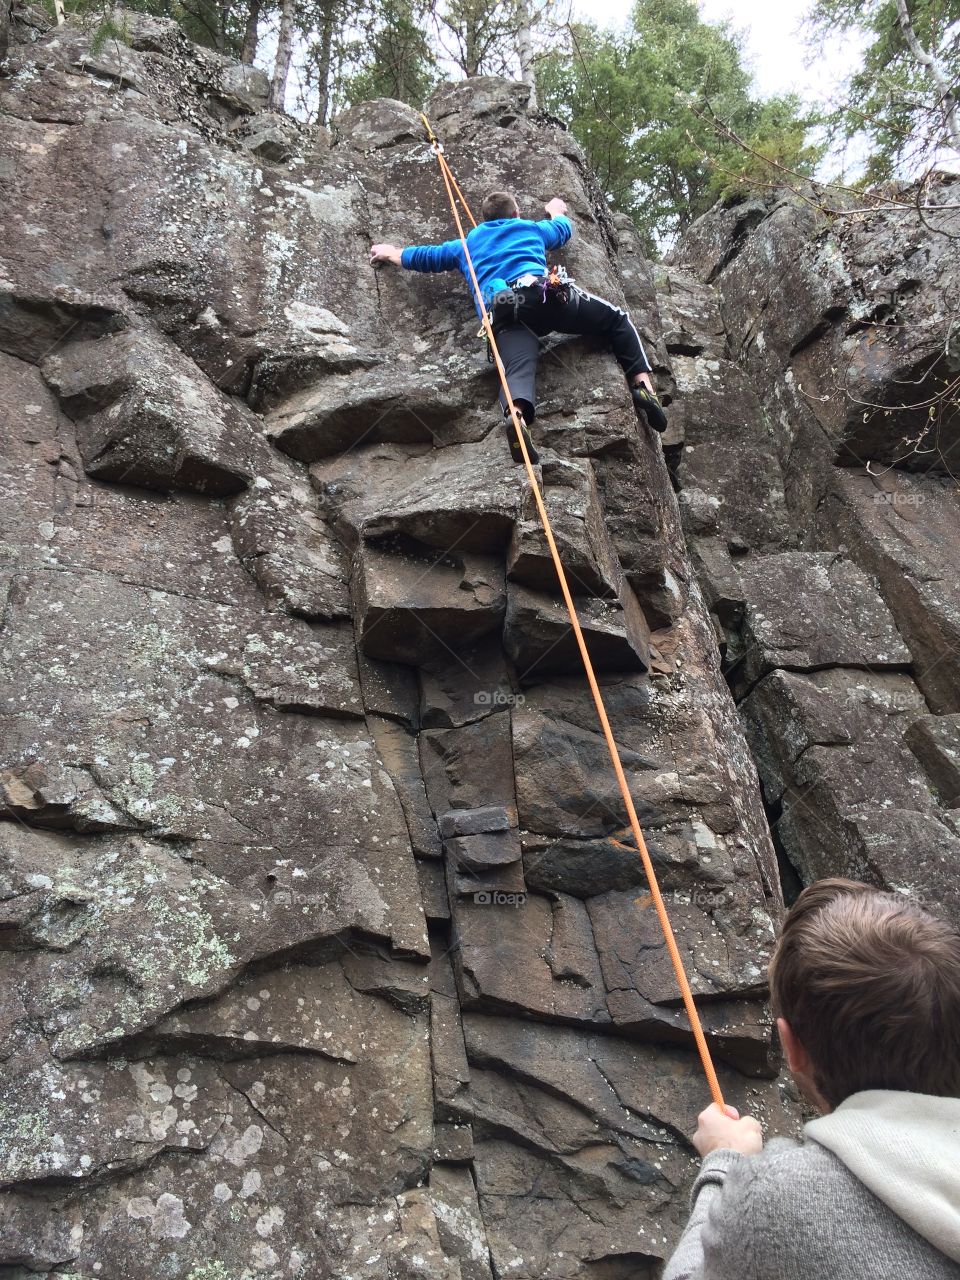 Dance of the Ballerina (5.8) at the Bluffs 